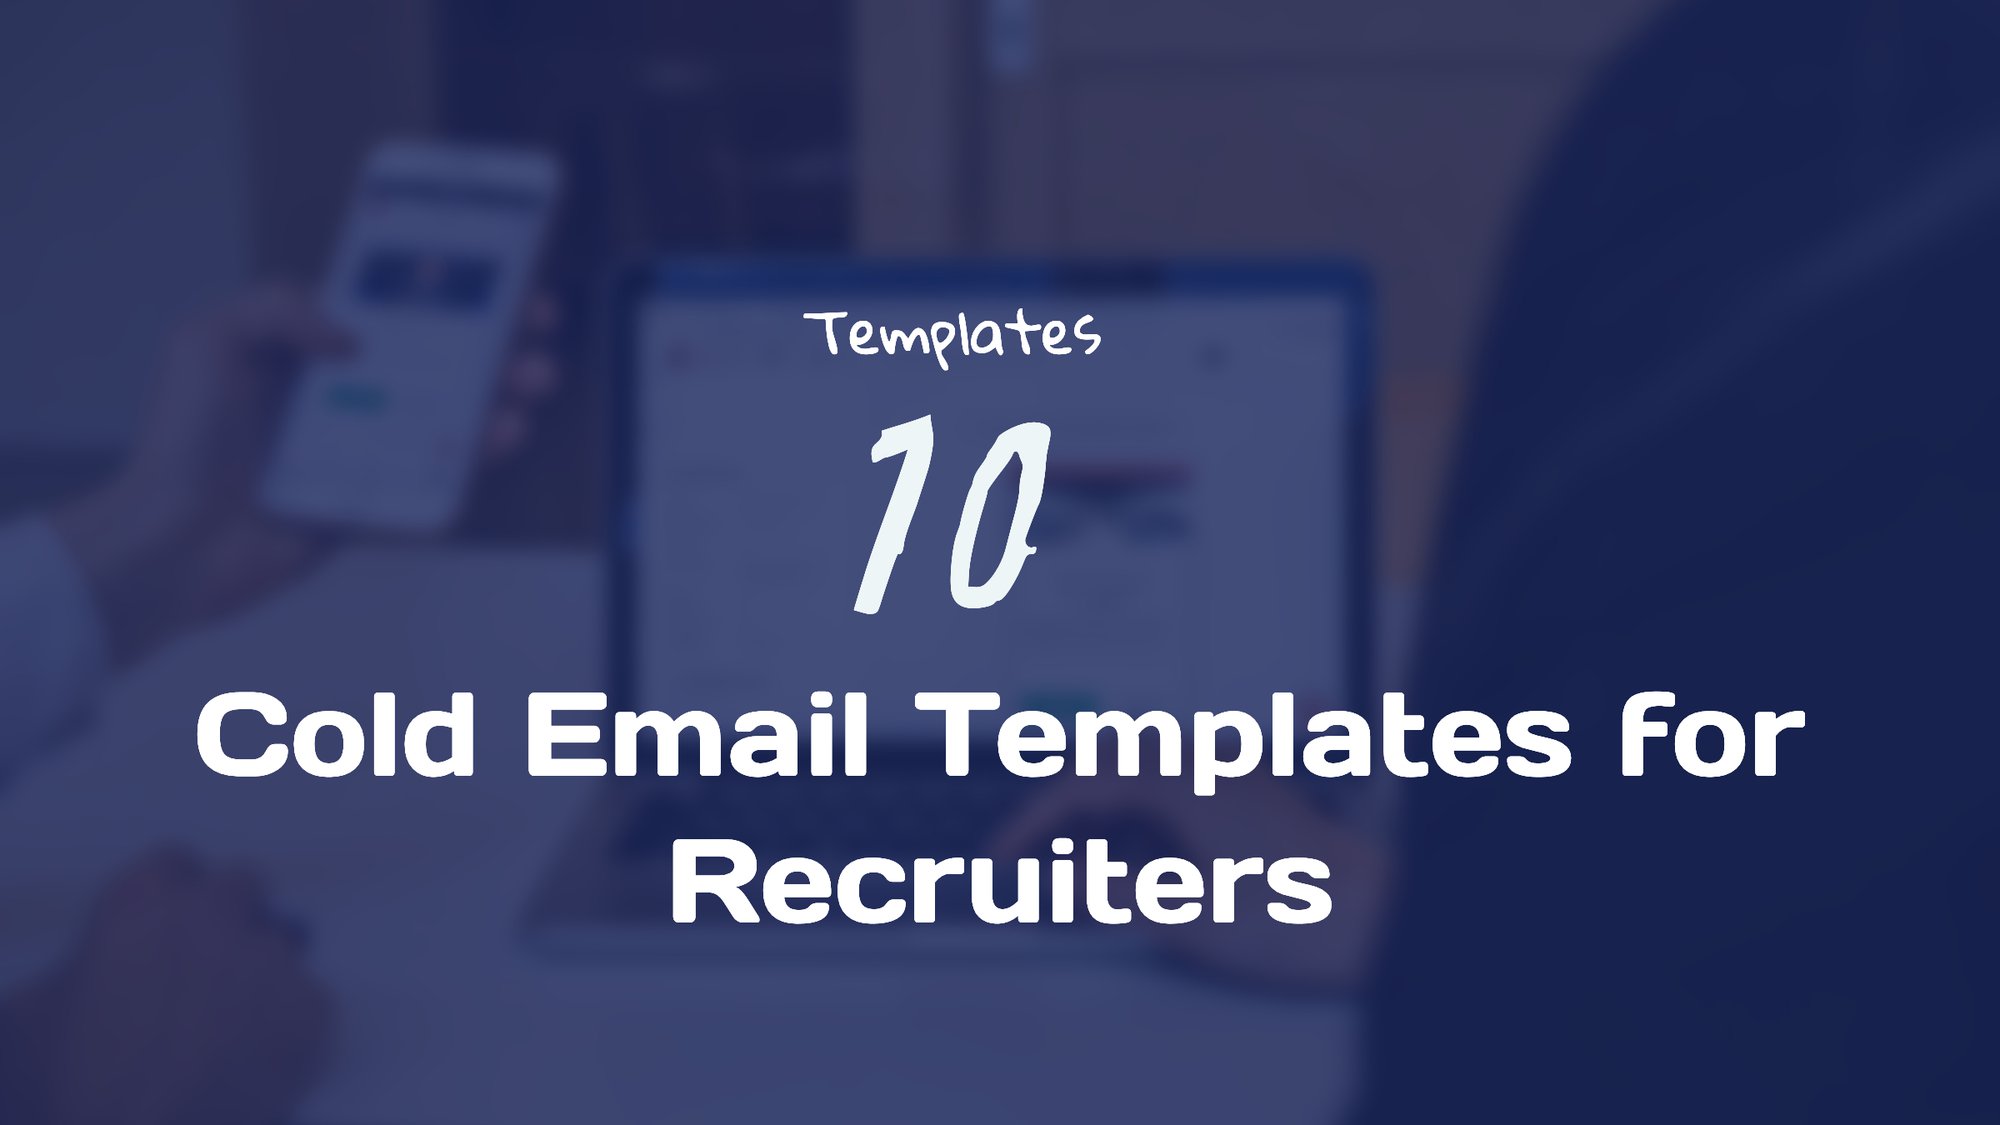 Cold Email Templates for Recruiters [Updated 2021]